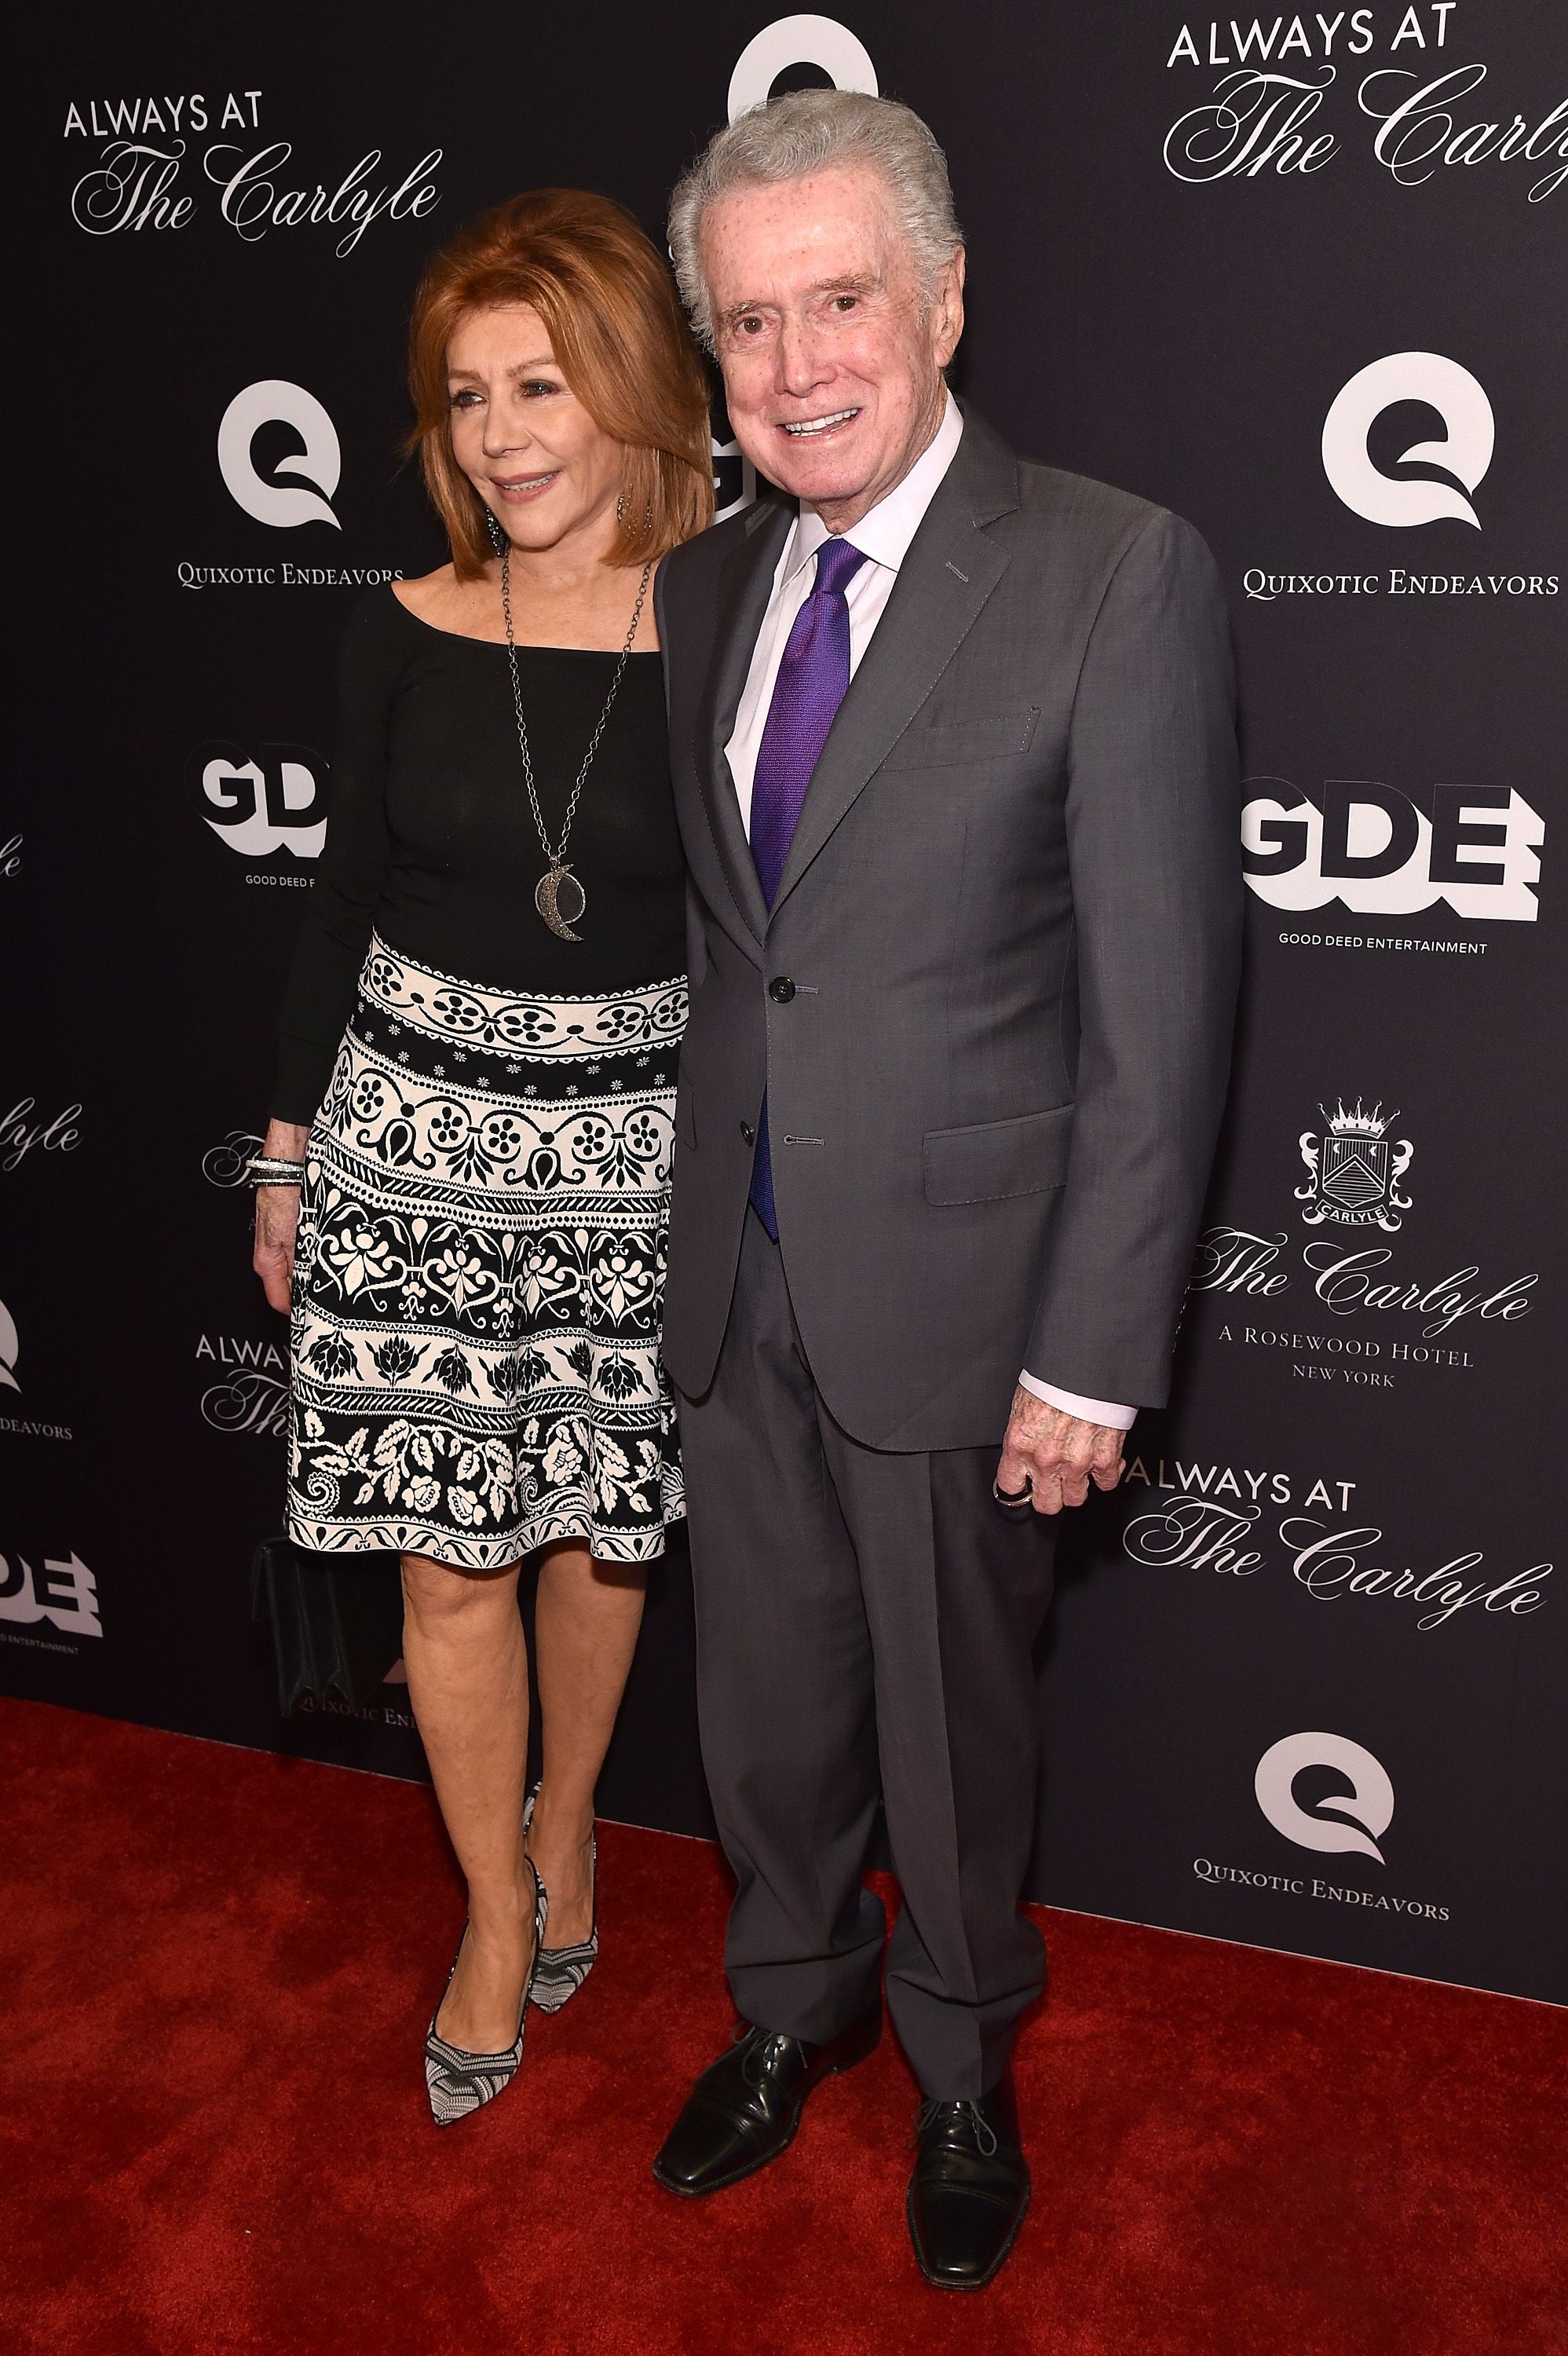 Joy Philbin and Regis Philbin attend the New York premiere of "Always At The Carlyle" at The Paris Theatre on May 8, 2018 | Photo: Getty Images